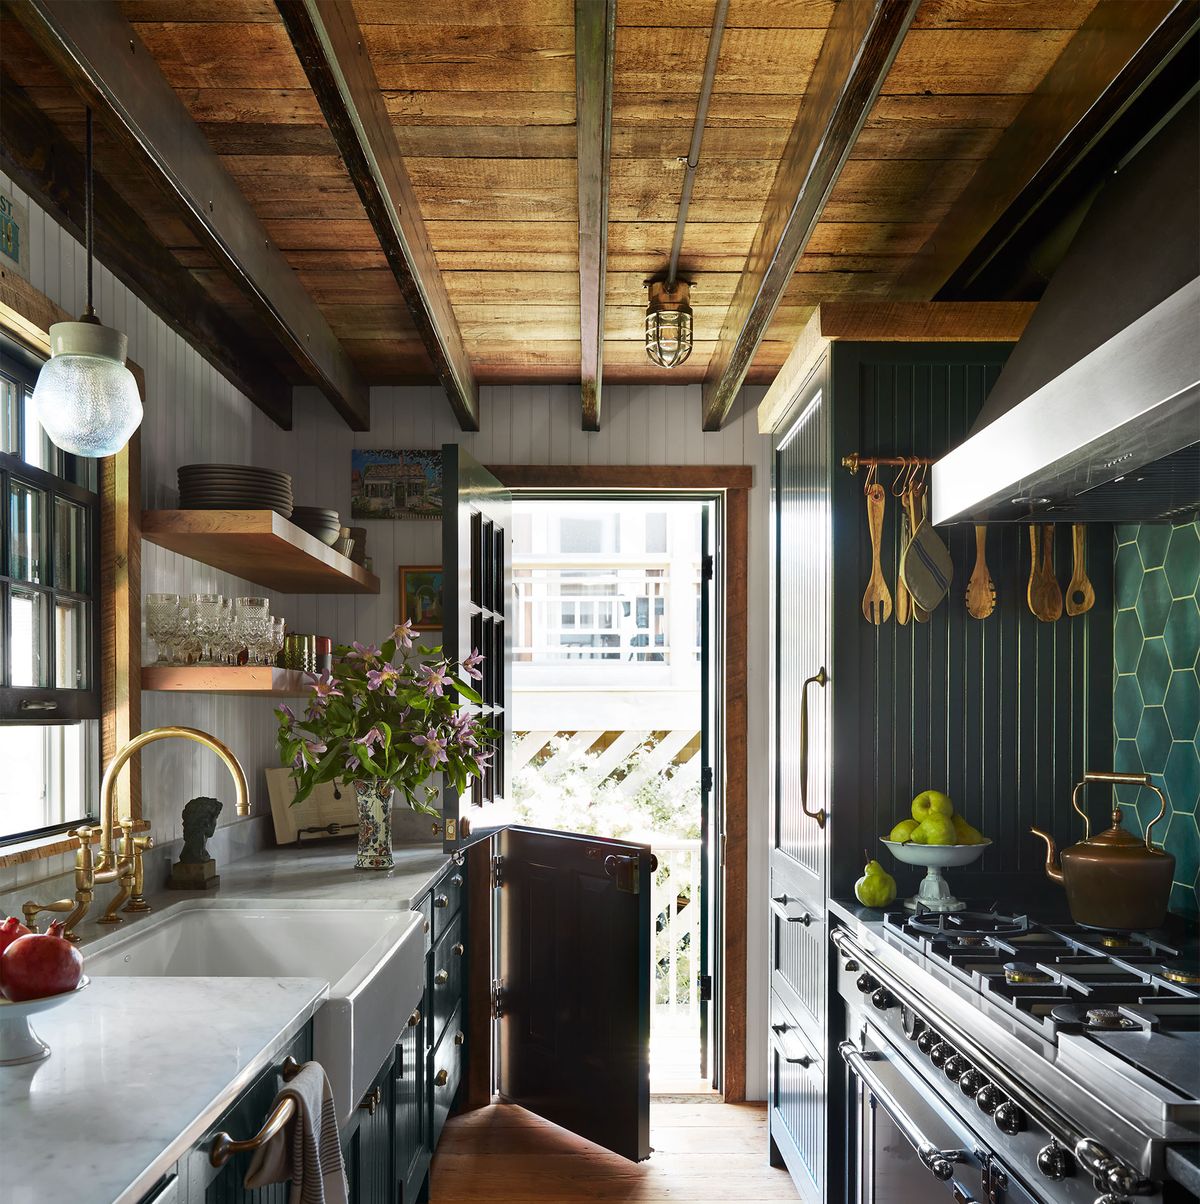 15 Tiny Home Kitchens to Inspire You